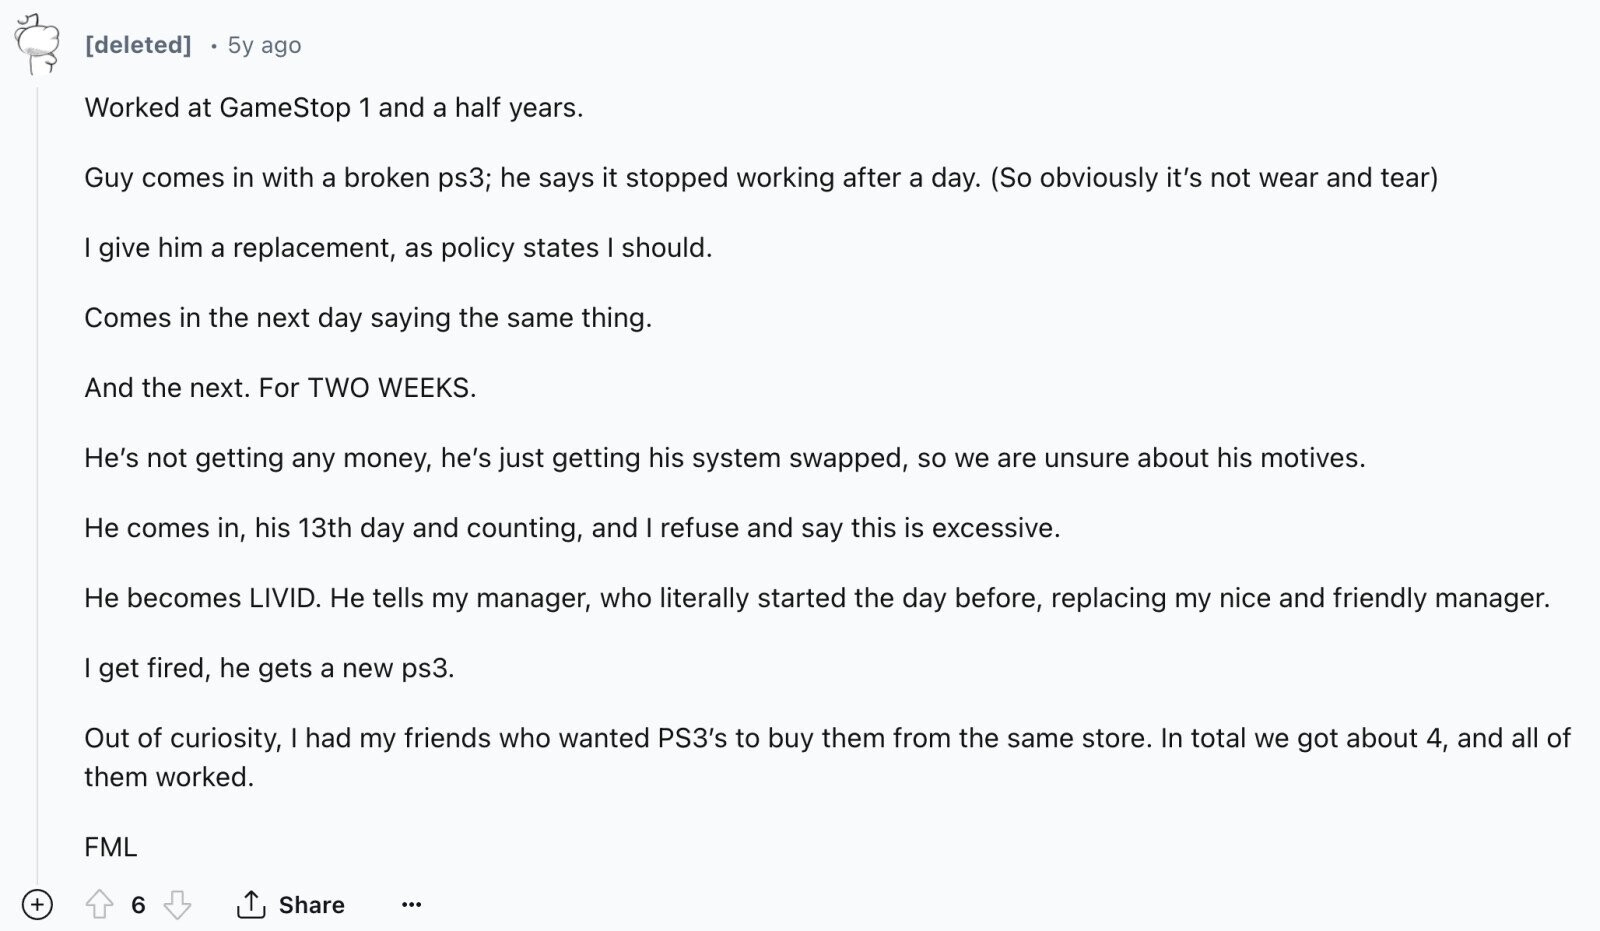 [deleted] 5y ago Worked at GameStop 1 and a half years. Guy comes in with a broken ps3; he says it stopped working after a day. (So obviously it's not wear and tear) I give him a replacement, as policy states I should. Comes in the next day saying the same thing. And the next. For TWO WEEKS. He's not getting any money, he's just getting his system swapped, so we are unsure about his motives. Не comes in, his 13th day and counting, and I refuse and say this is excessive. Не becomes LIVID. Не tells my manager, who 